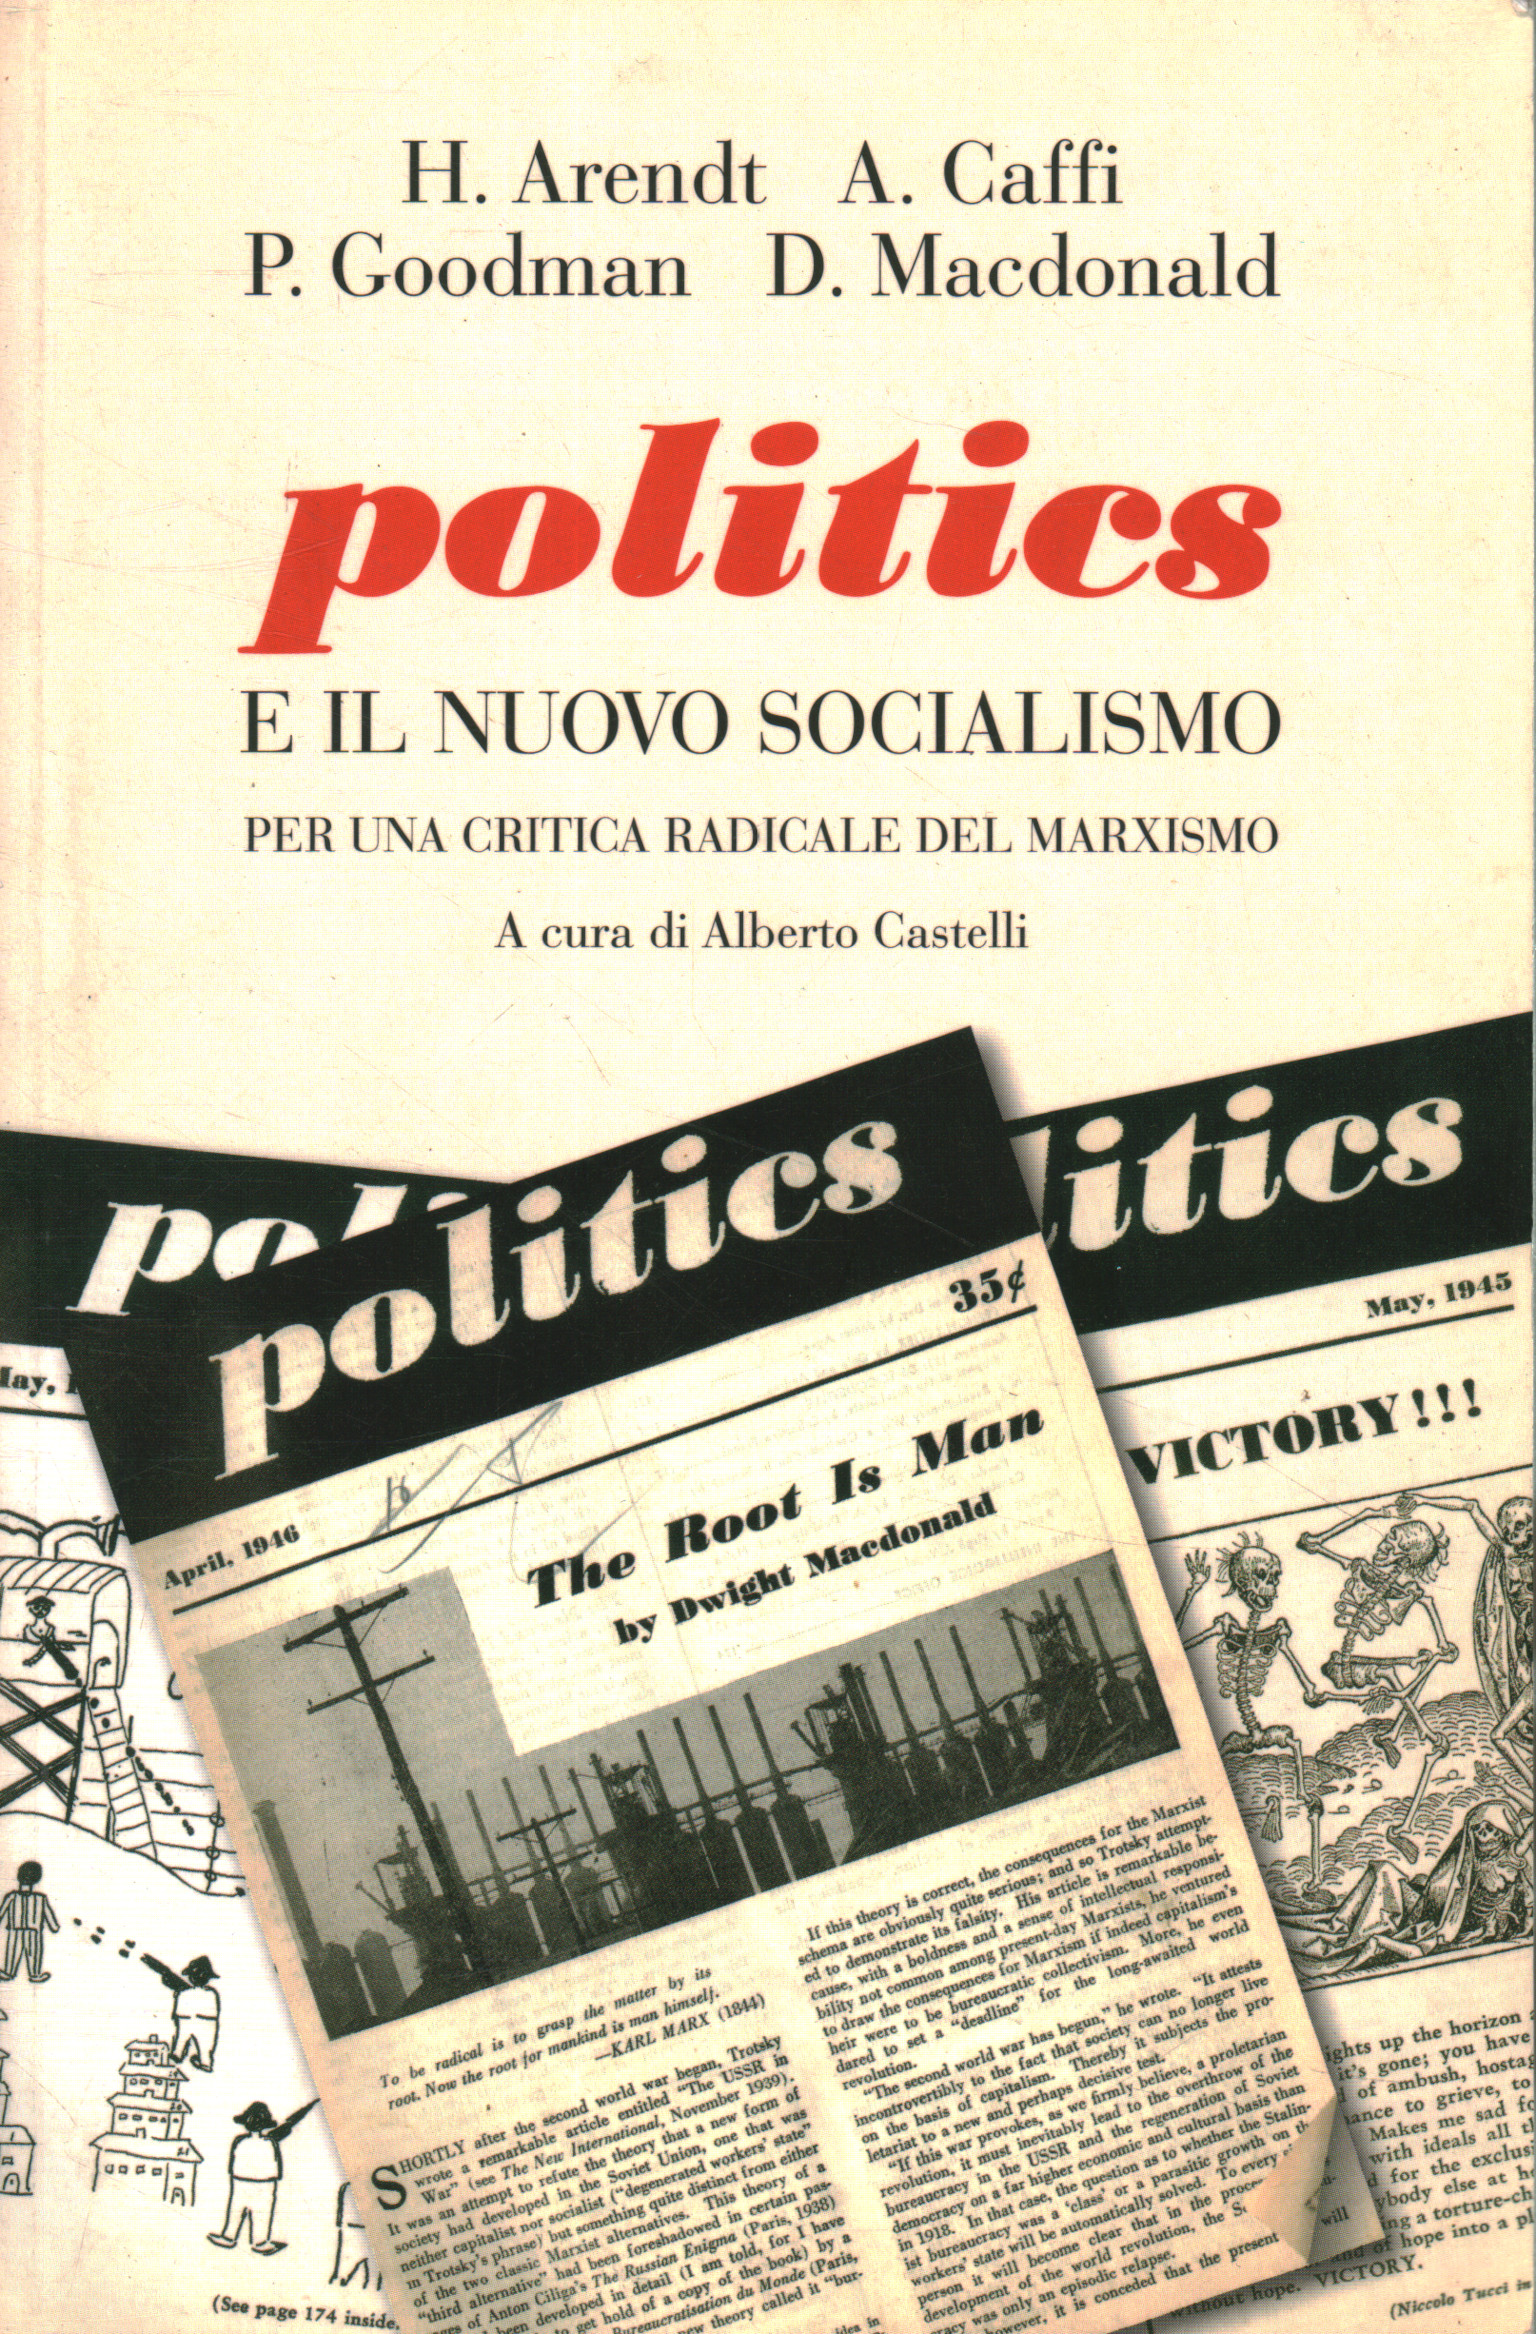 Politics and the new socialism